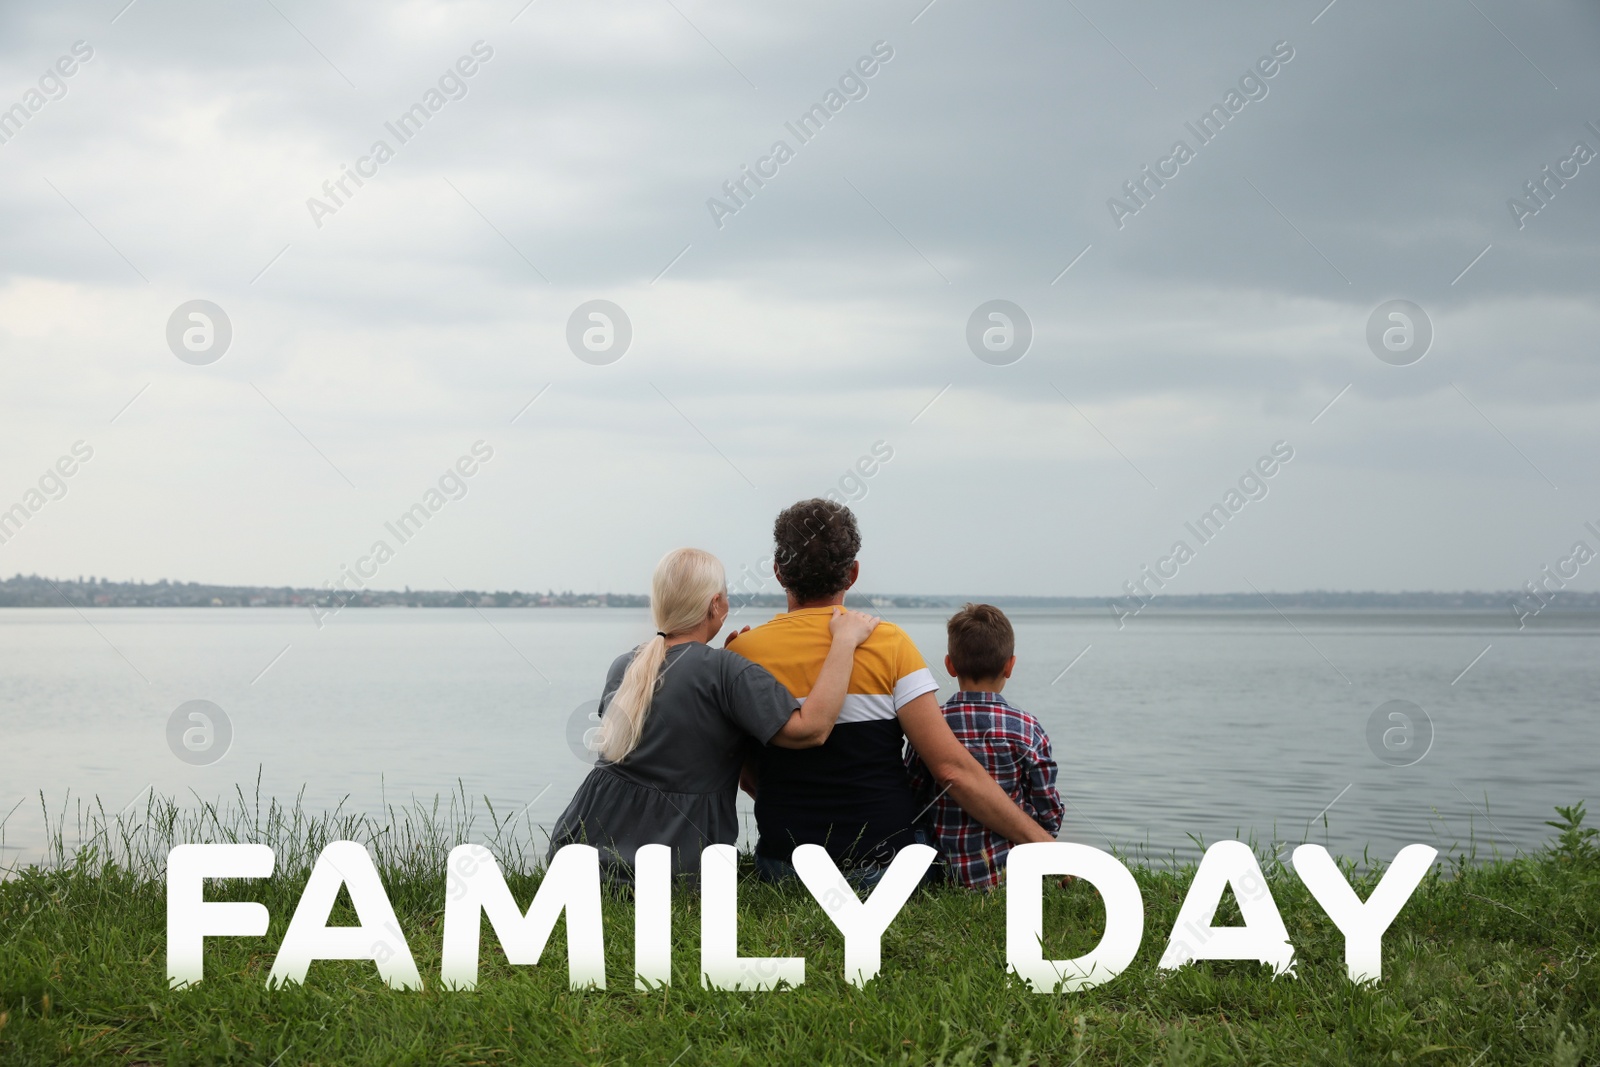 Image of Little boy and grandparents spending time together near river, back view. Happy Family Day